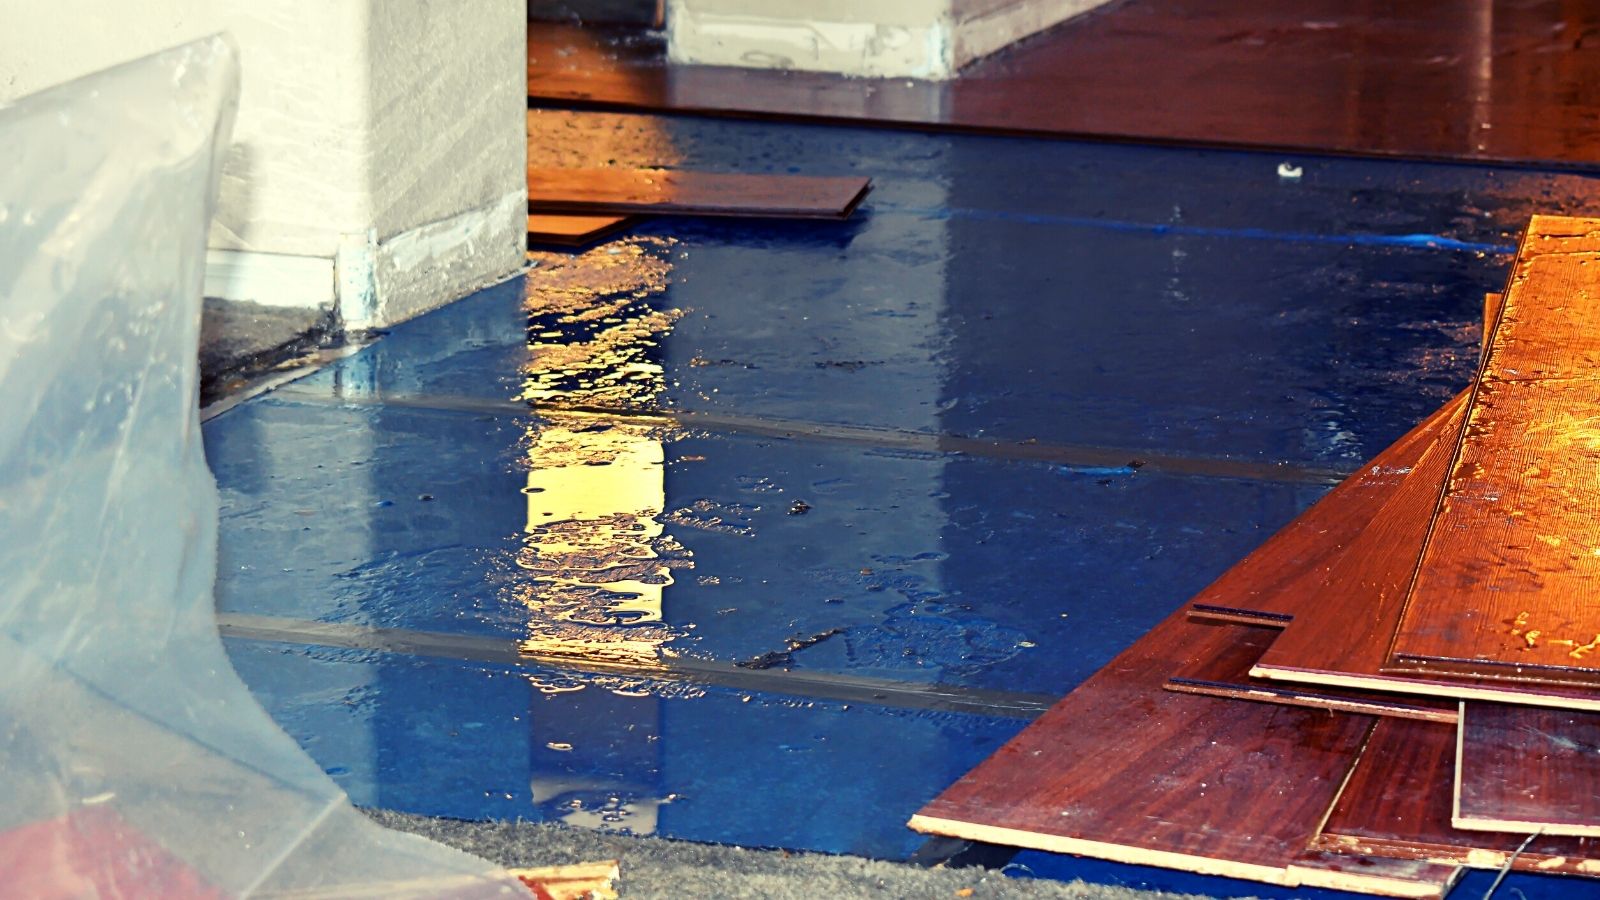 know the 3 categories of water damage